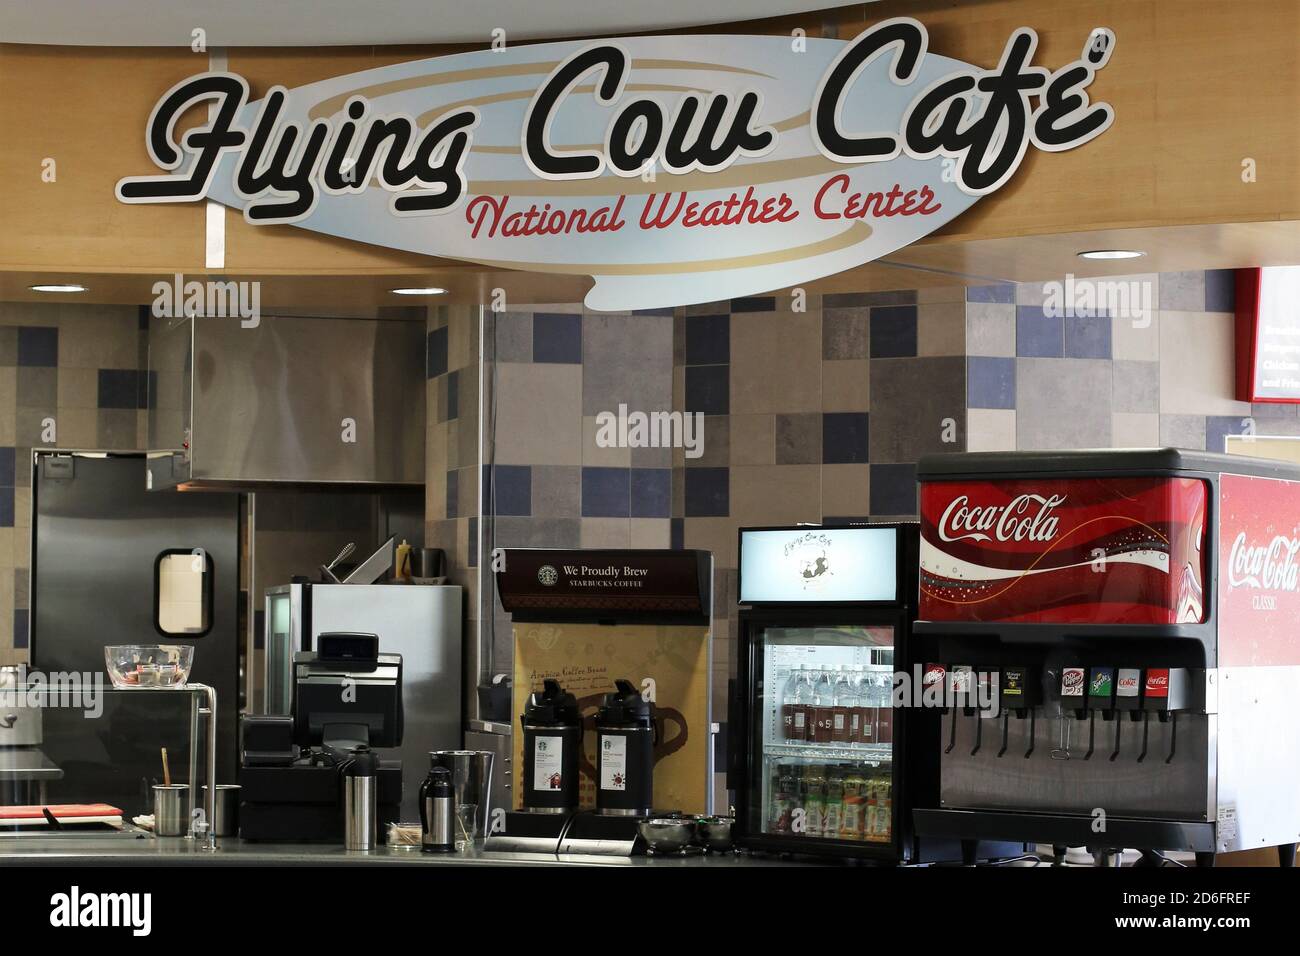 The Flying Cow Cafe, in the National Weather Center offices in Norman, Oklahoma. Stock Photo